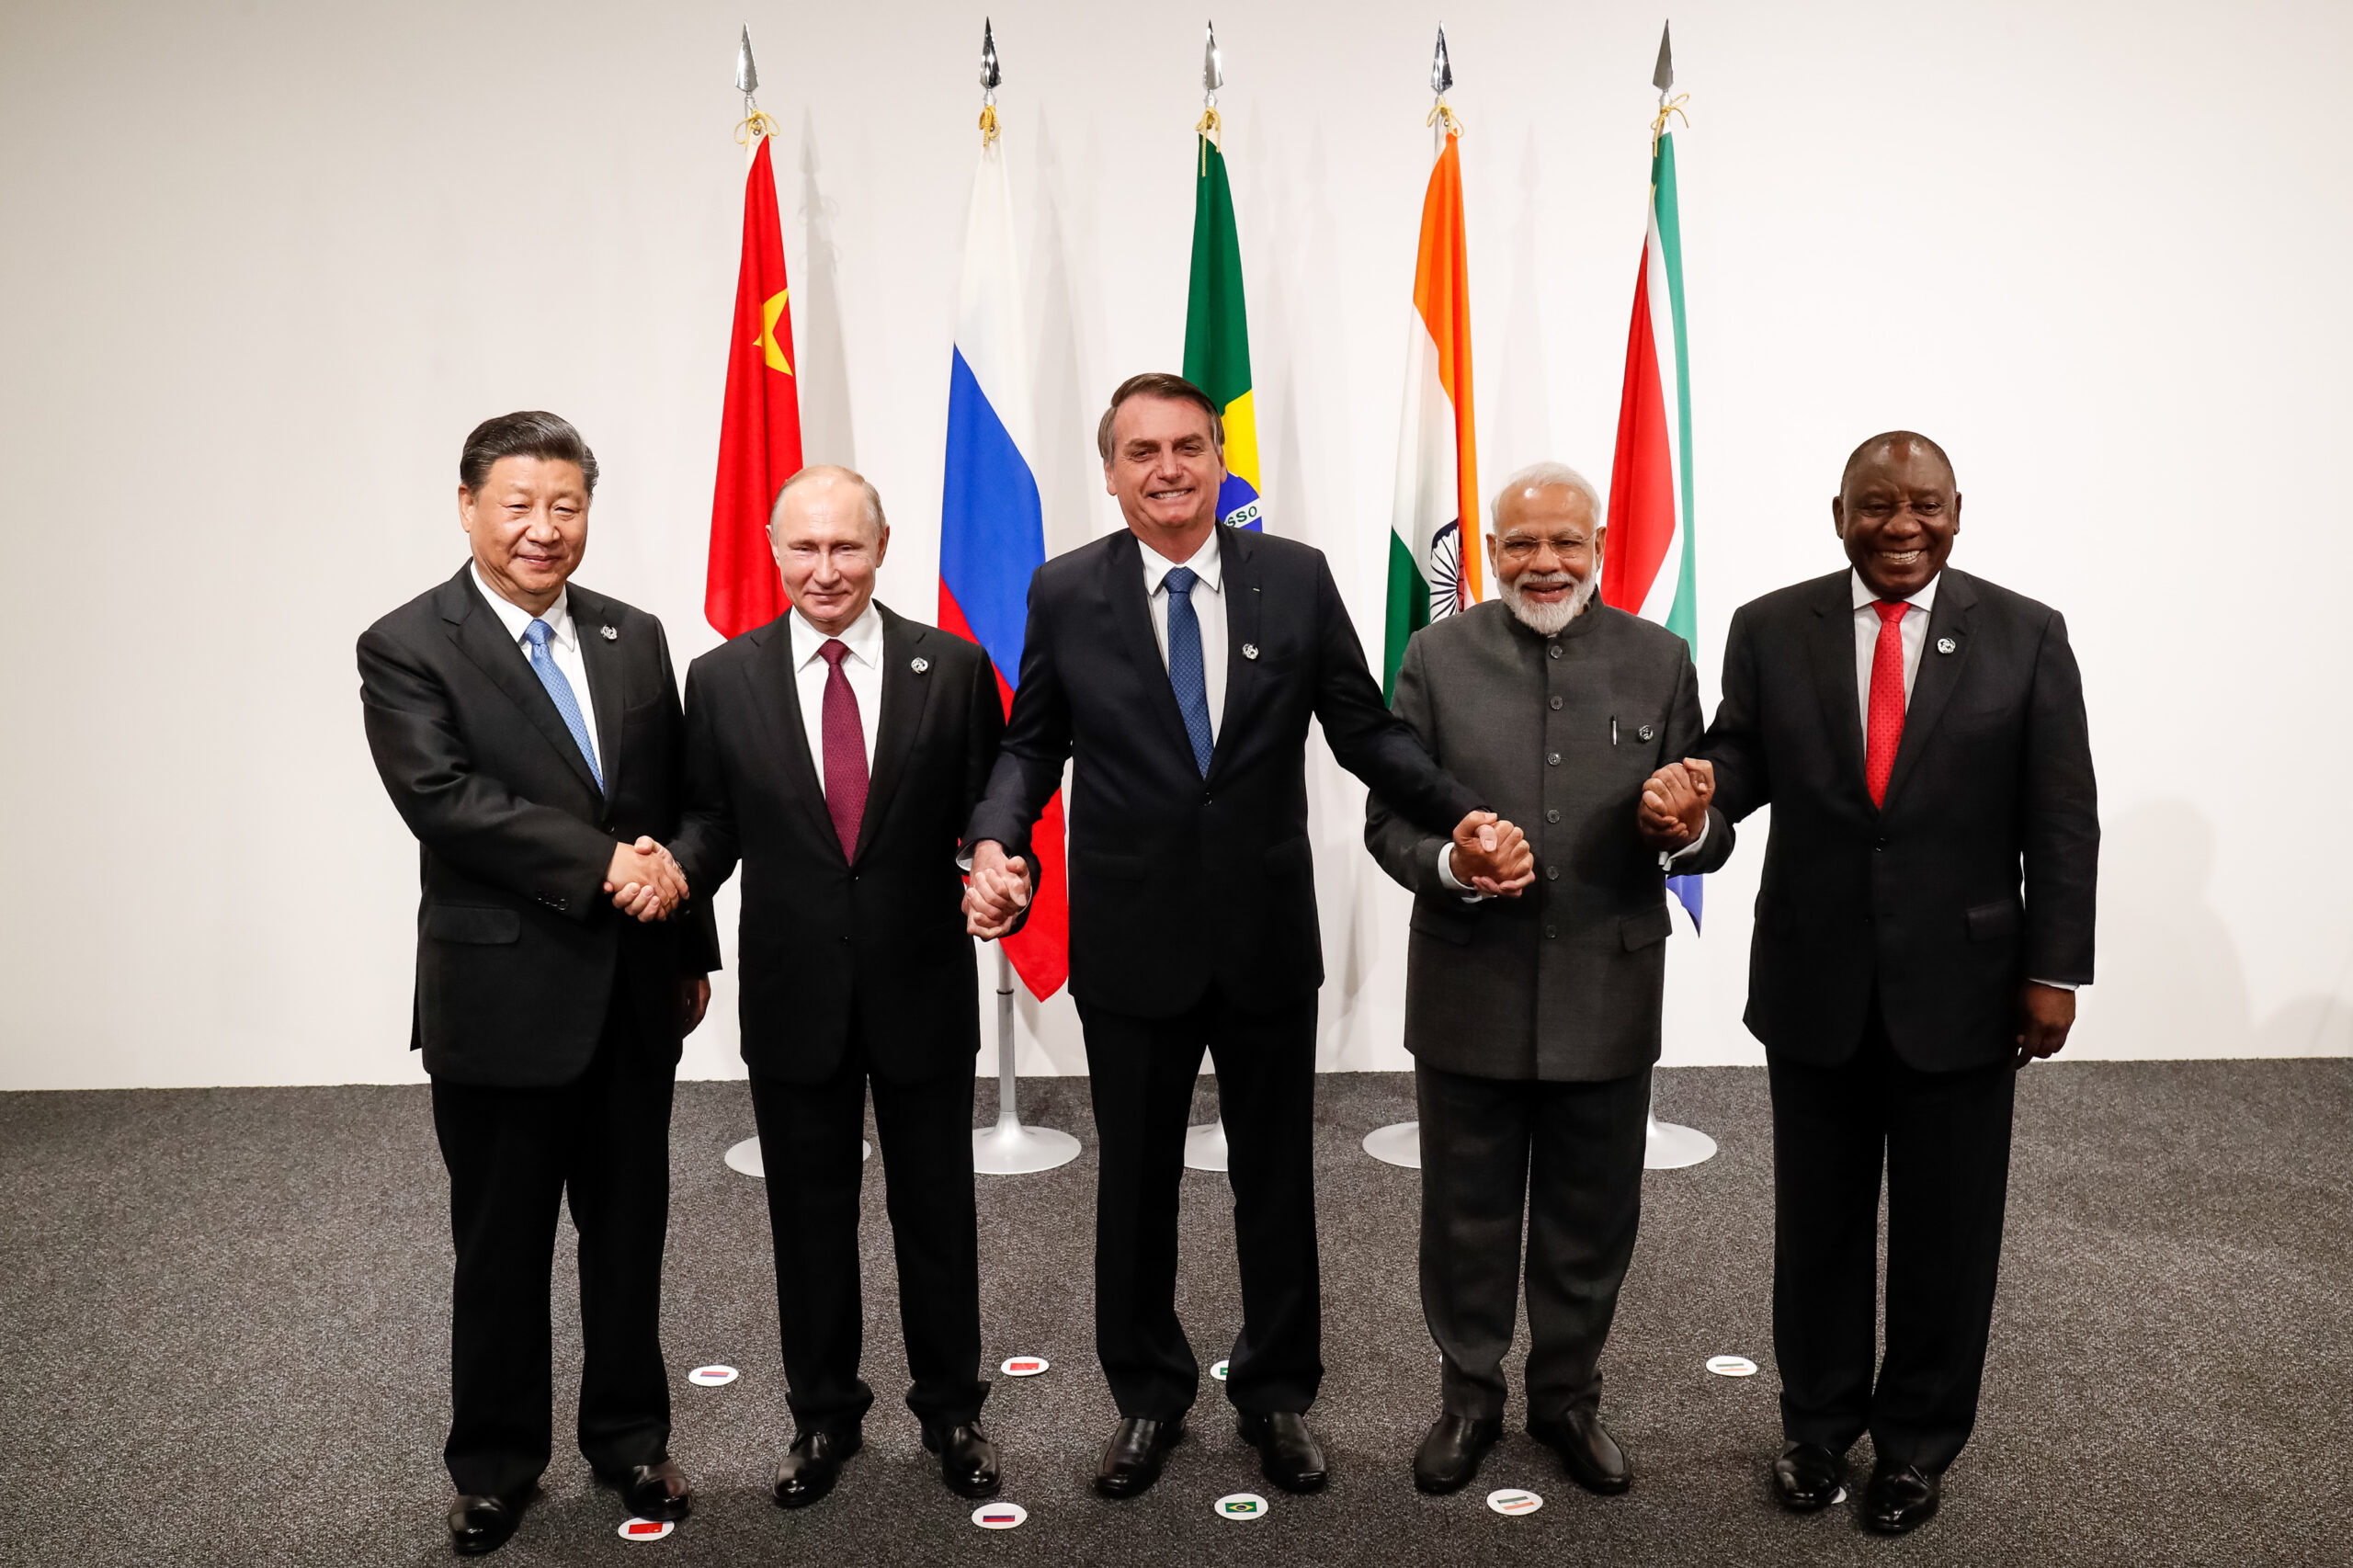 BRICS: China, India To Be Ahead of U.S. GDP in 2075